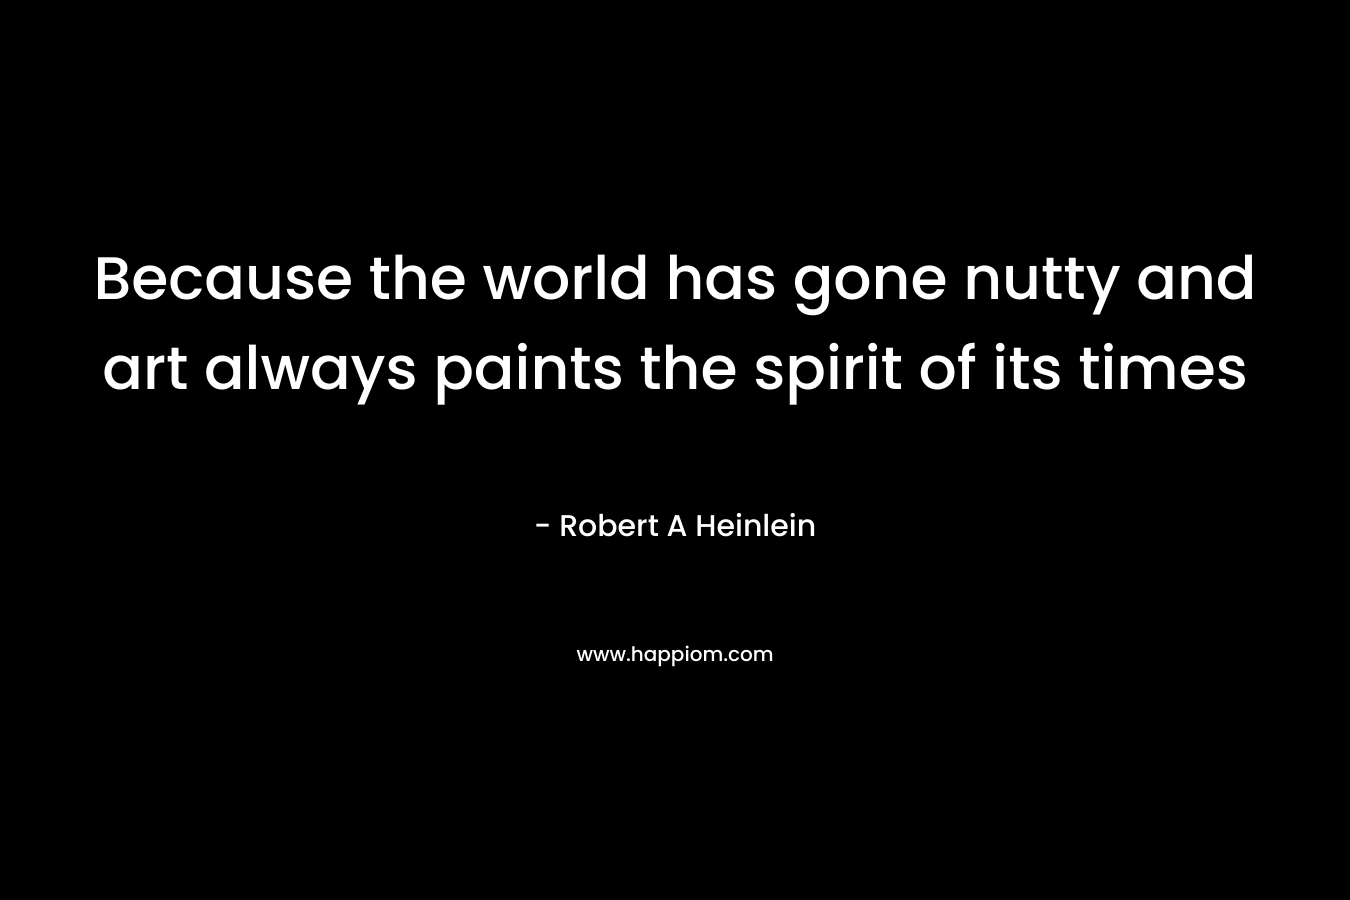 Because the world has gone nutty and art always paints the spirit of its times